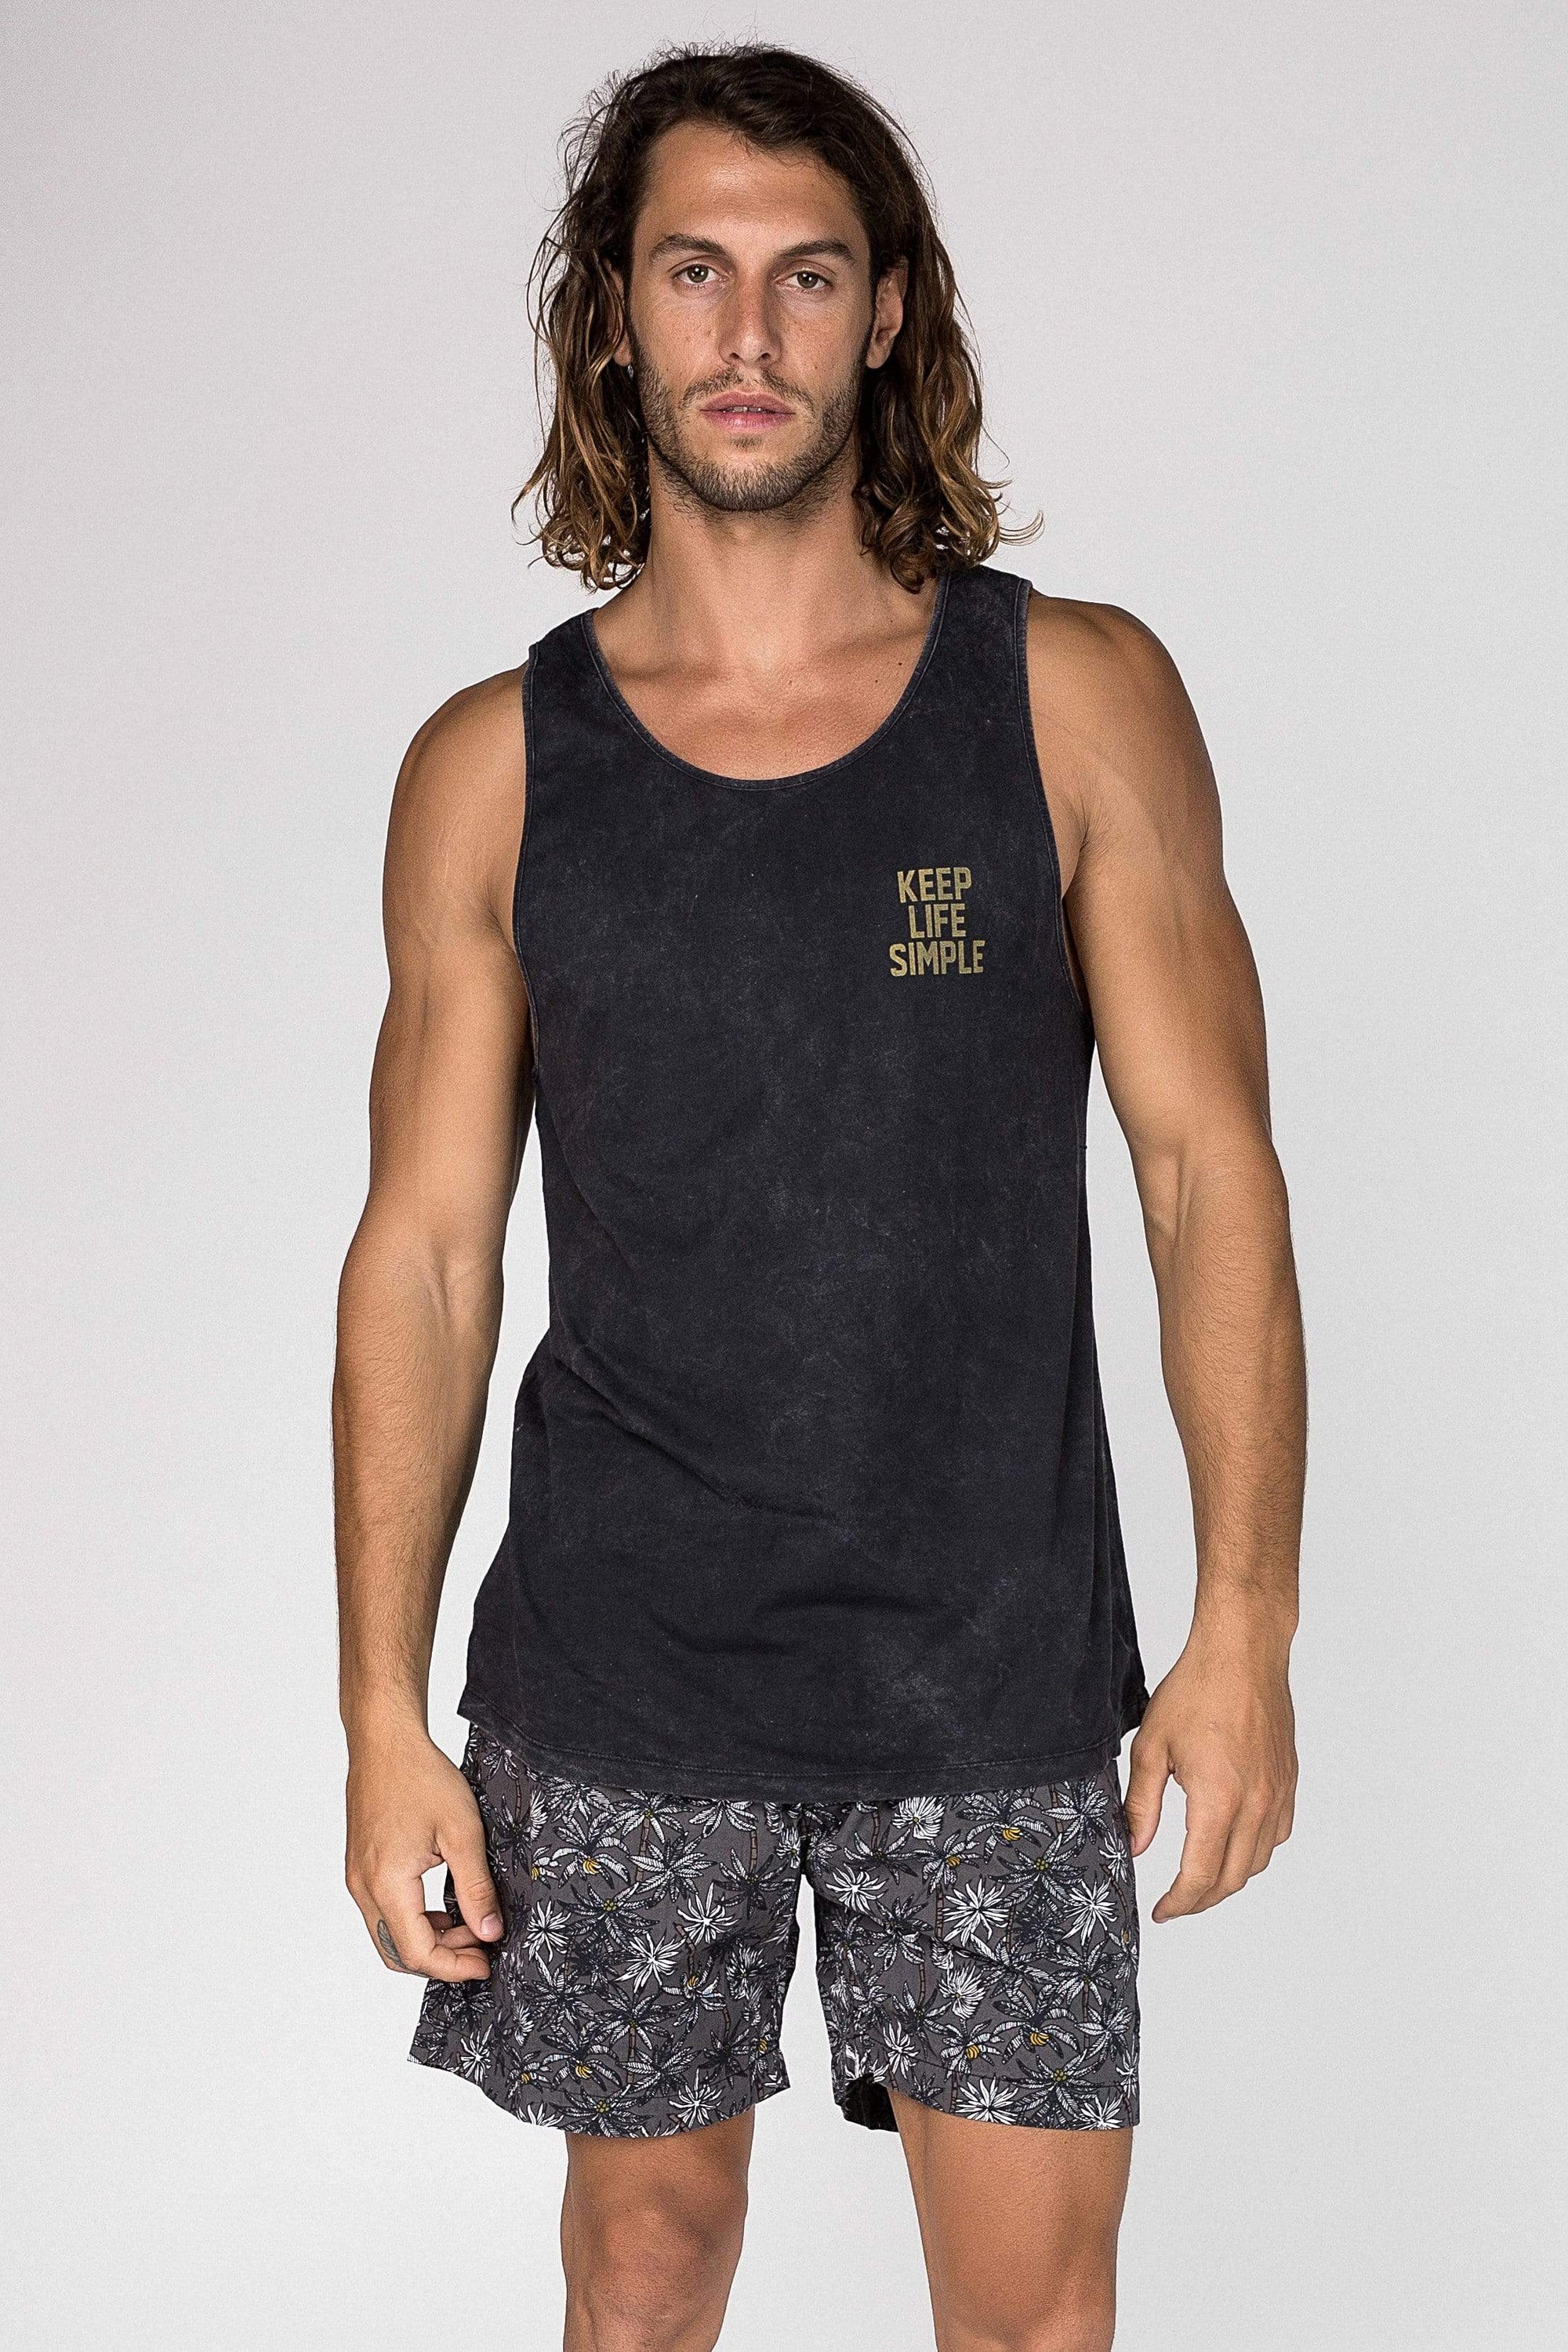 Sing Go Surf - Mens Muscle Tank - LOST IN PARADISE